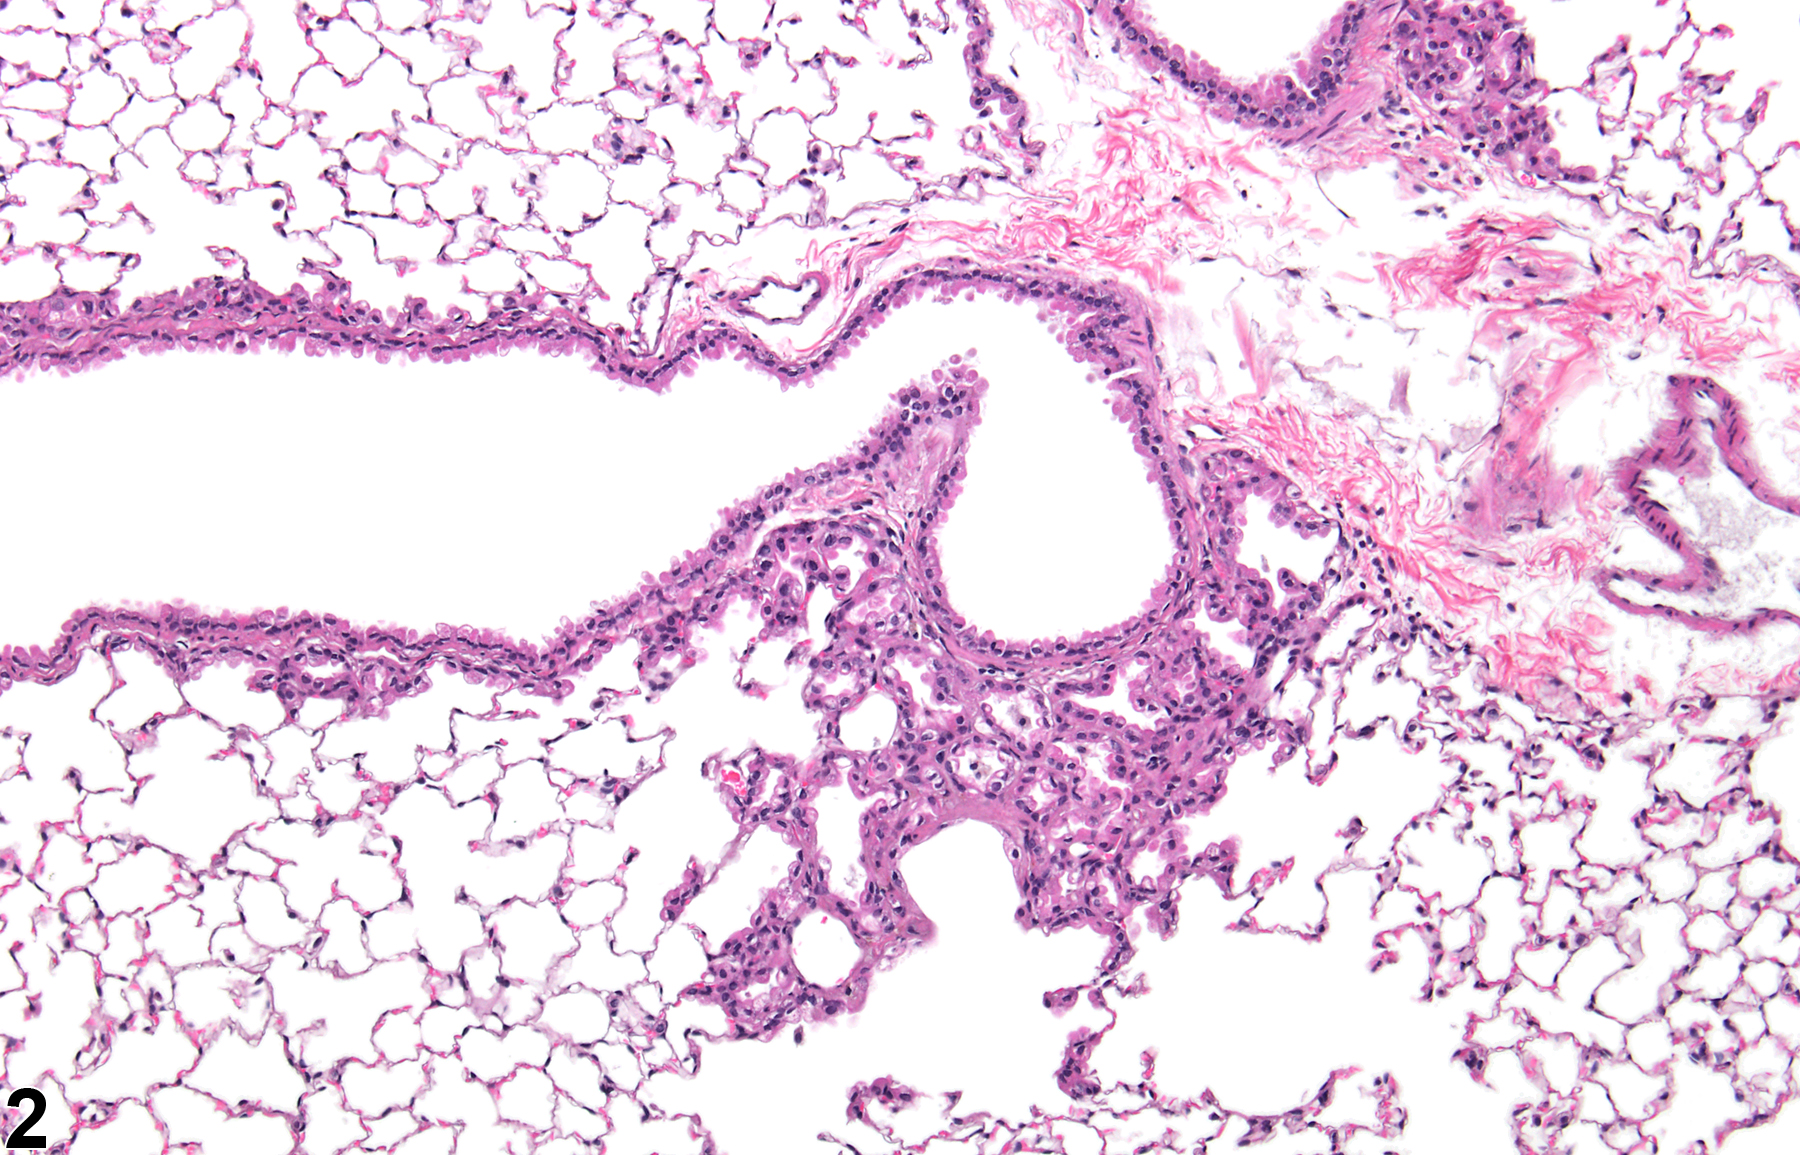 Image of alveolar/bronchiolar epithelial hyperplasia in the lung from a male B6C3F1/N mouse in a chronic study